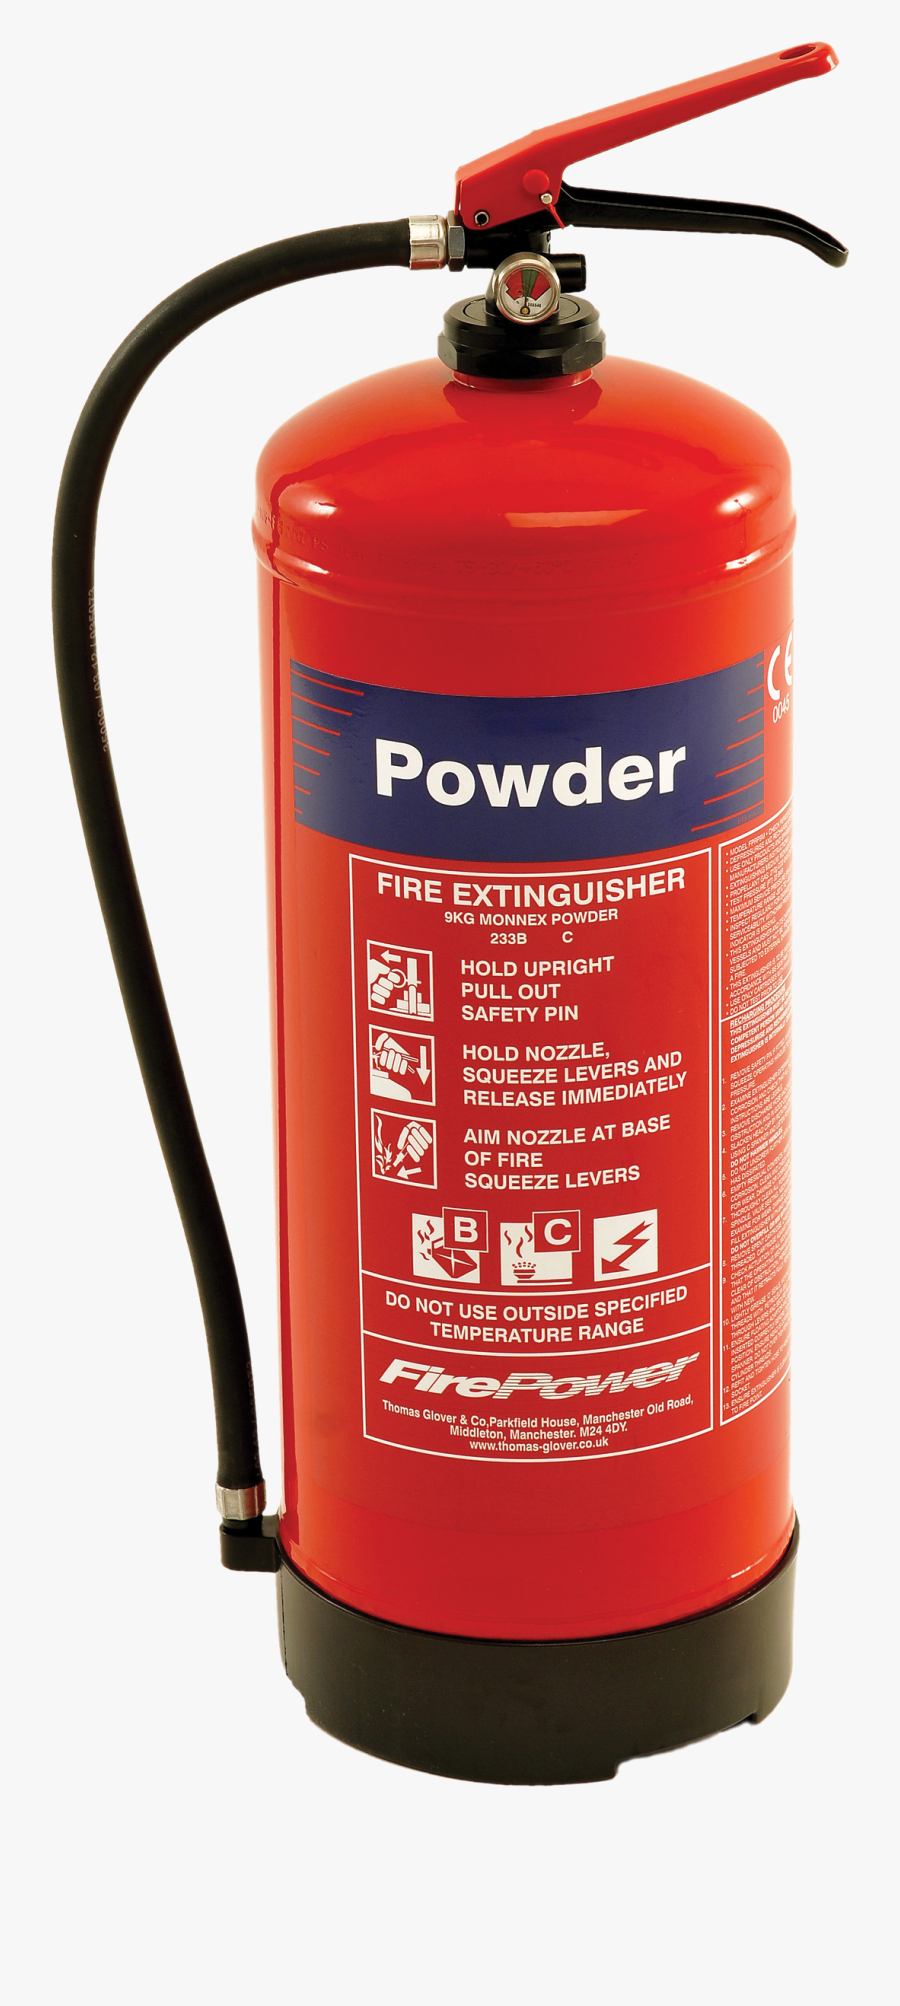 Dry Chemical Fire Extinguisher Png, Transparent Clipart